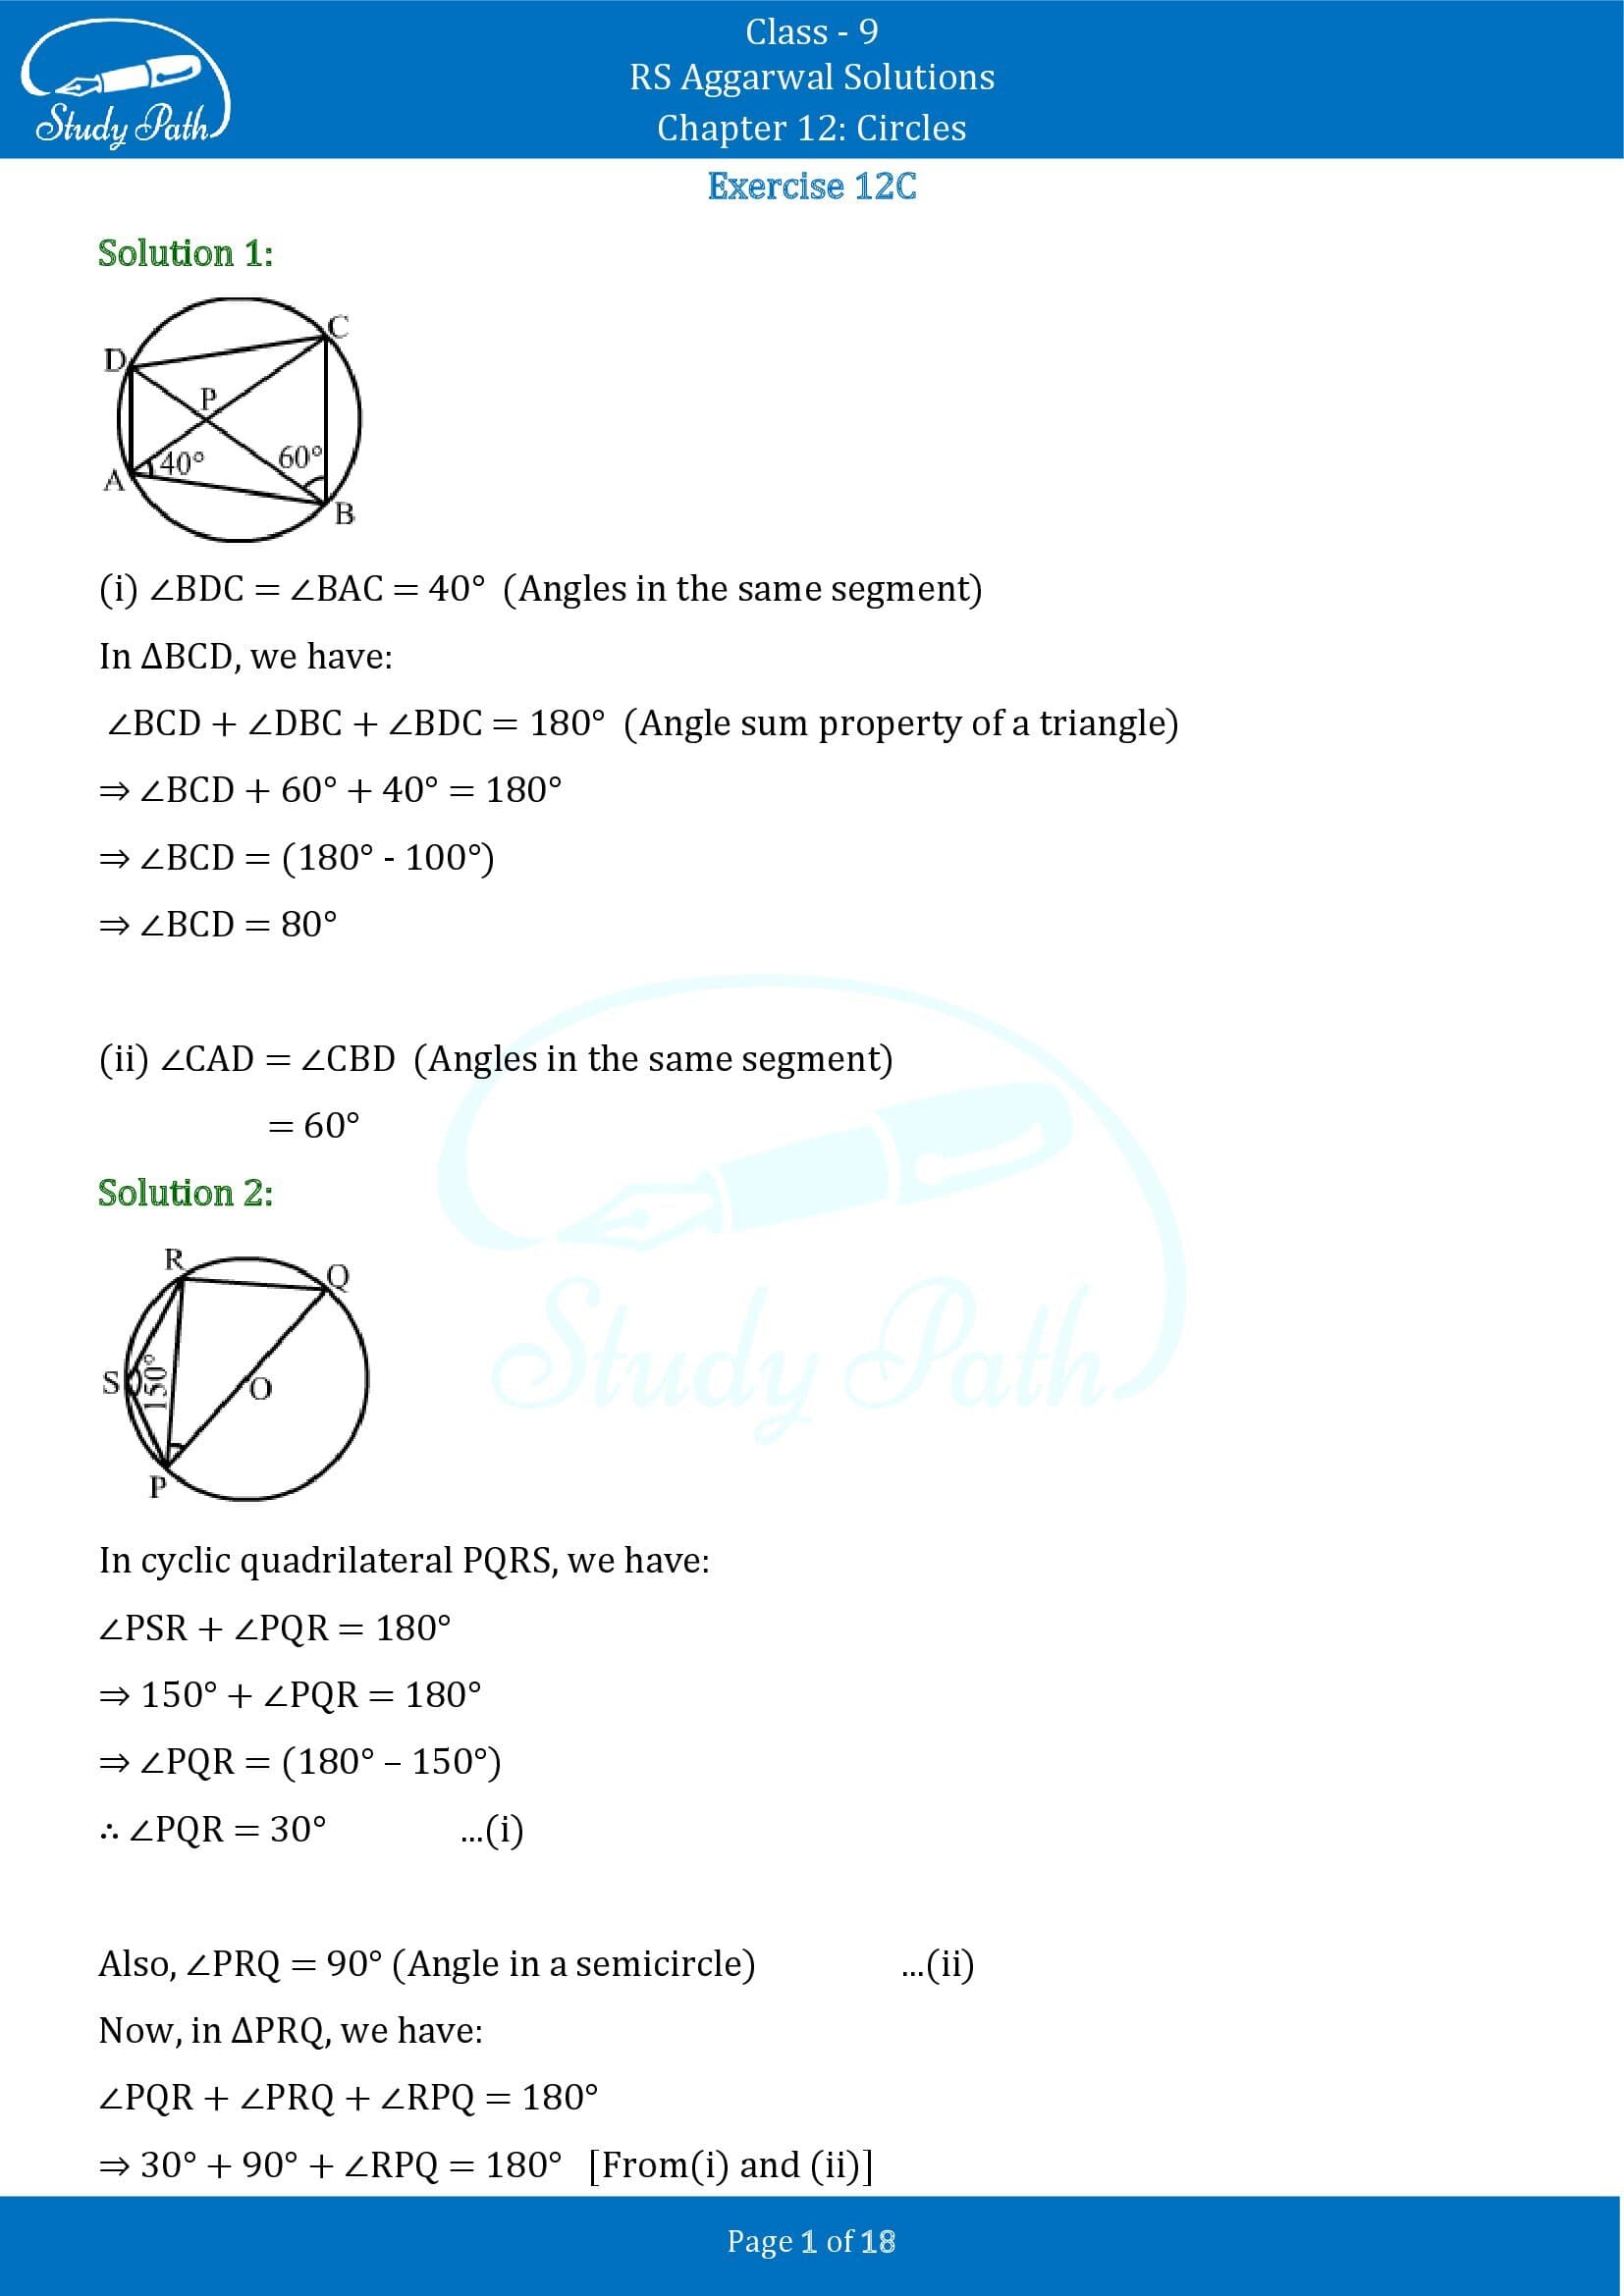 RS Aggarwal Solutions Class 9 Chapter 12 Circles Exercise 12C 00001